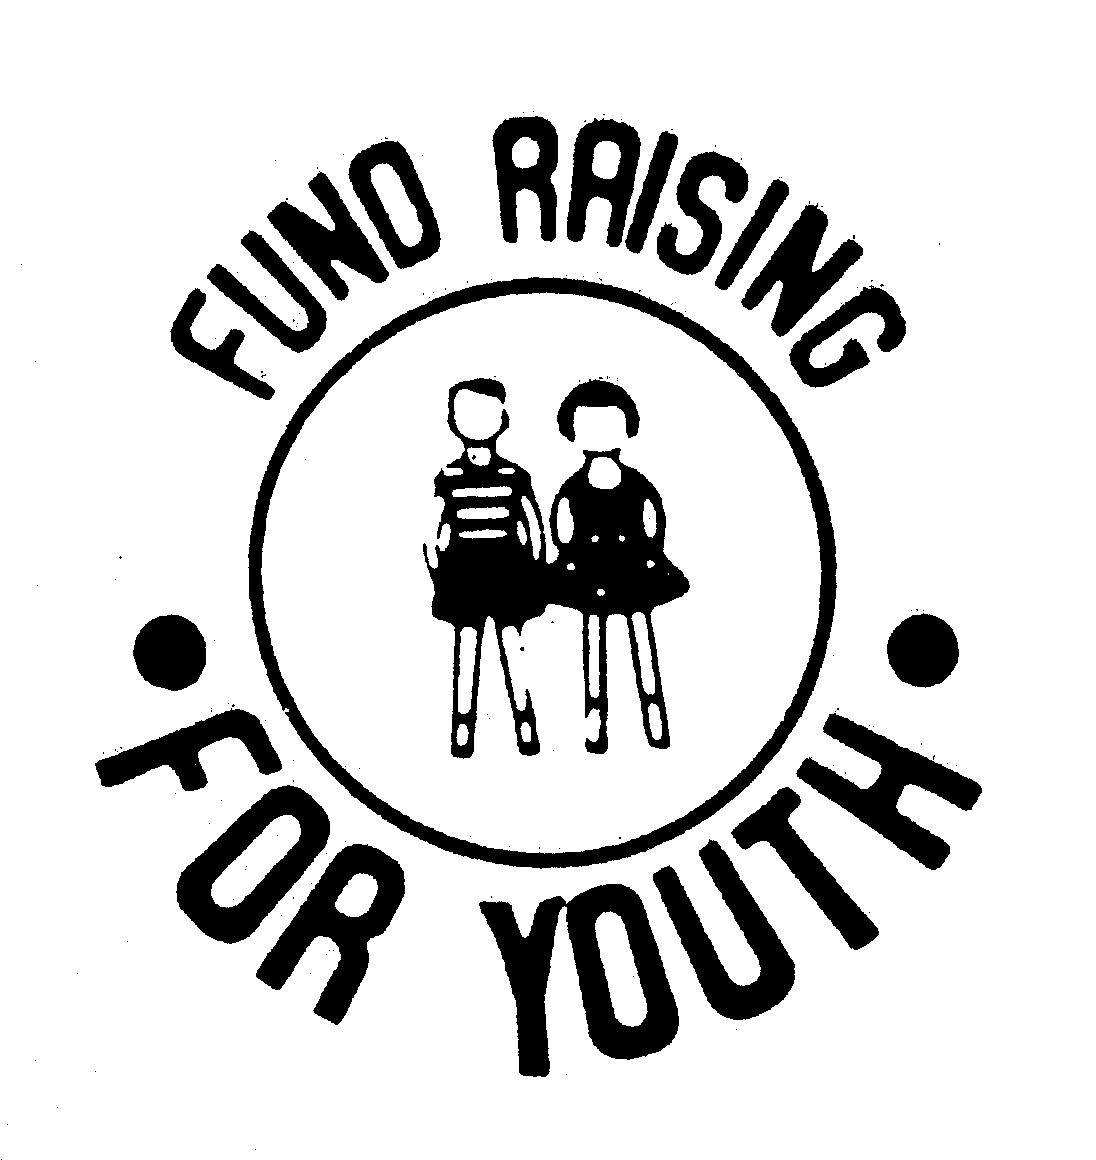  FUND RAISING FOR YOUTH